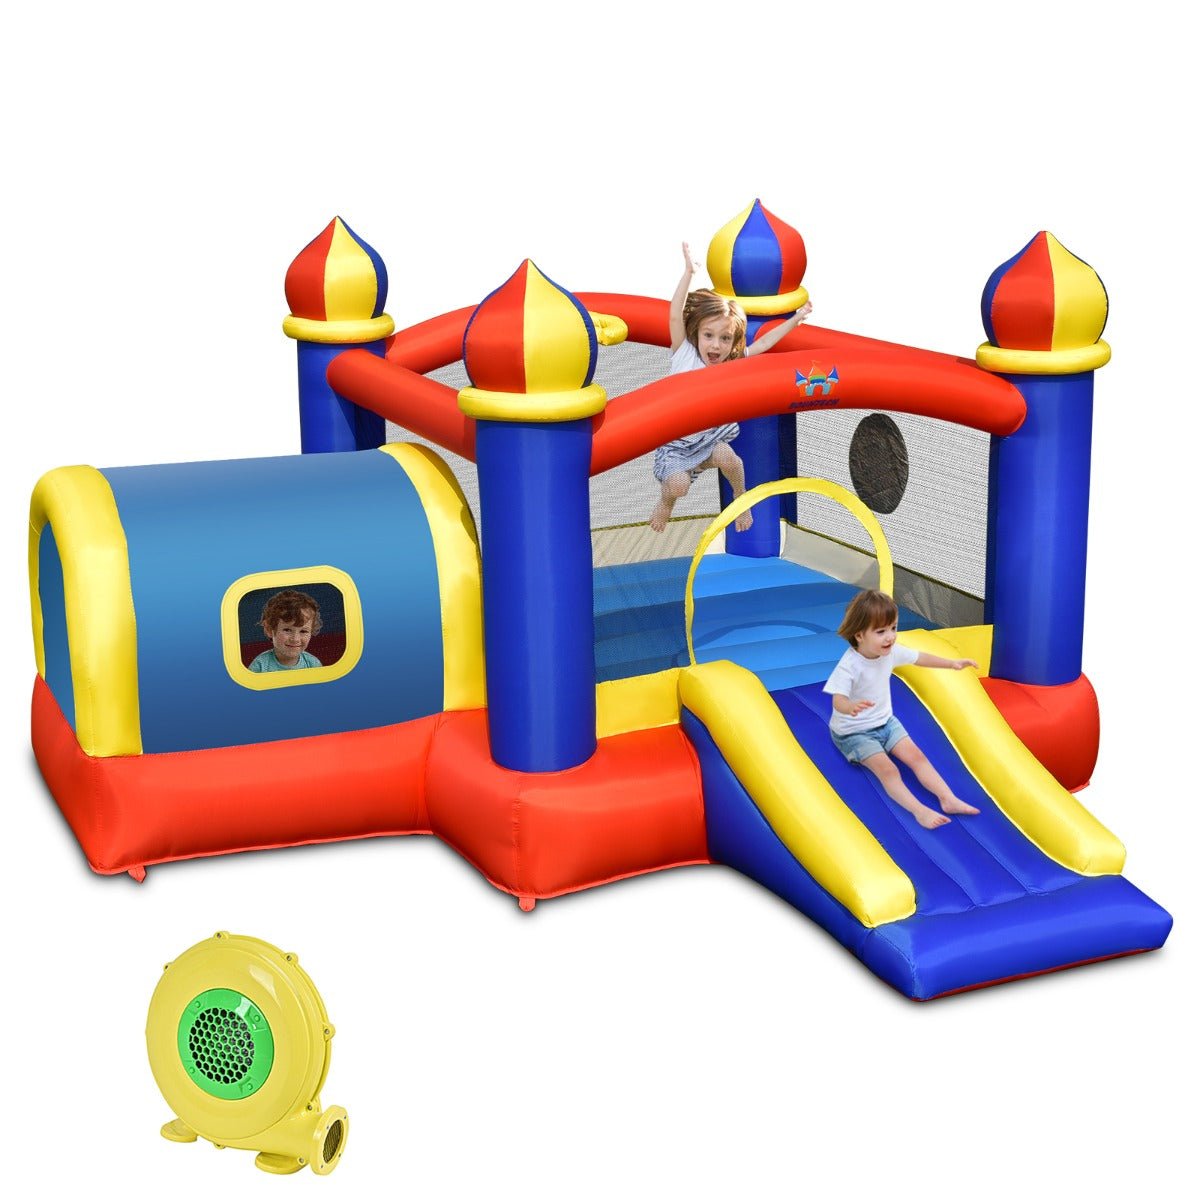 5-in-1 Inflatable Bounce House with Slide - Ultimate Outdoor Play Adventure